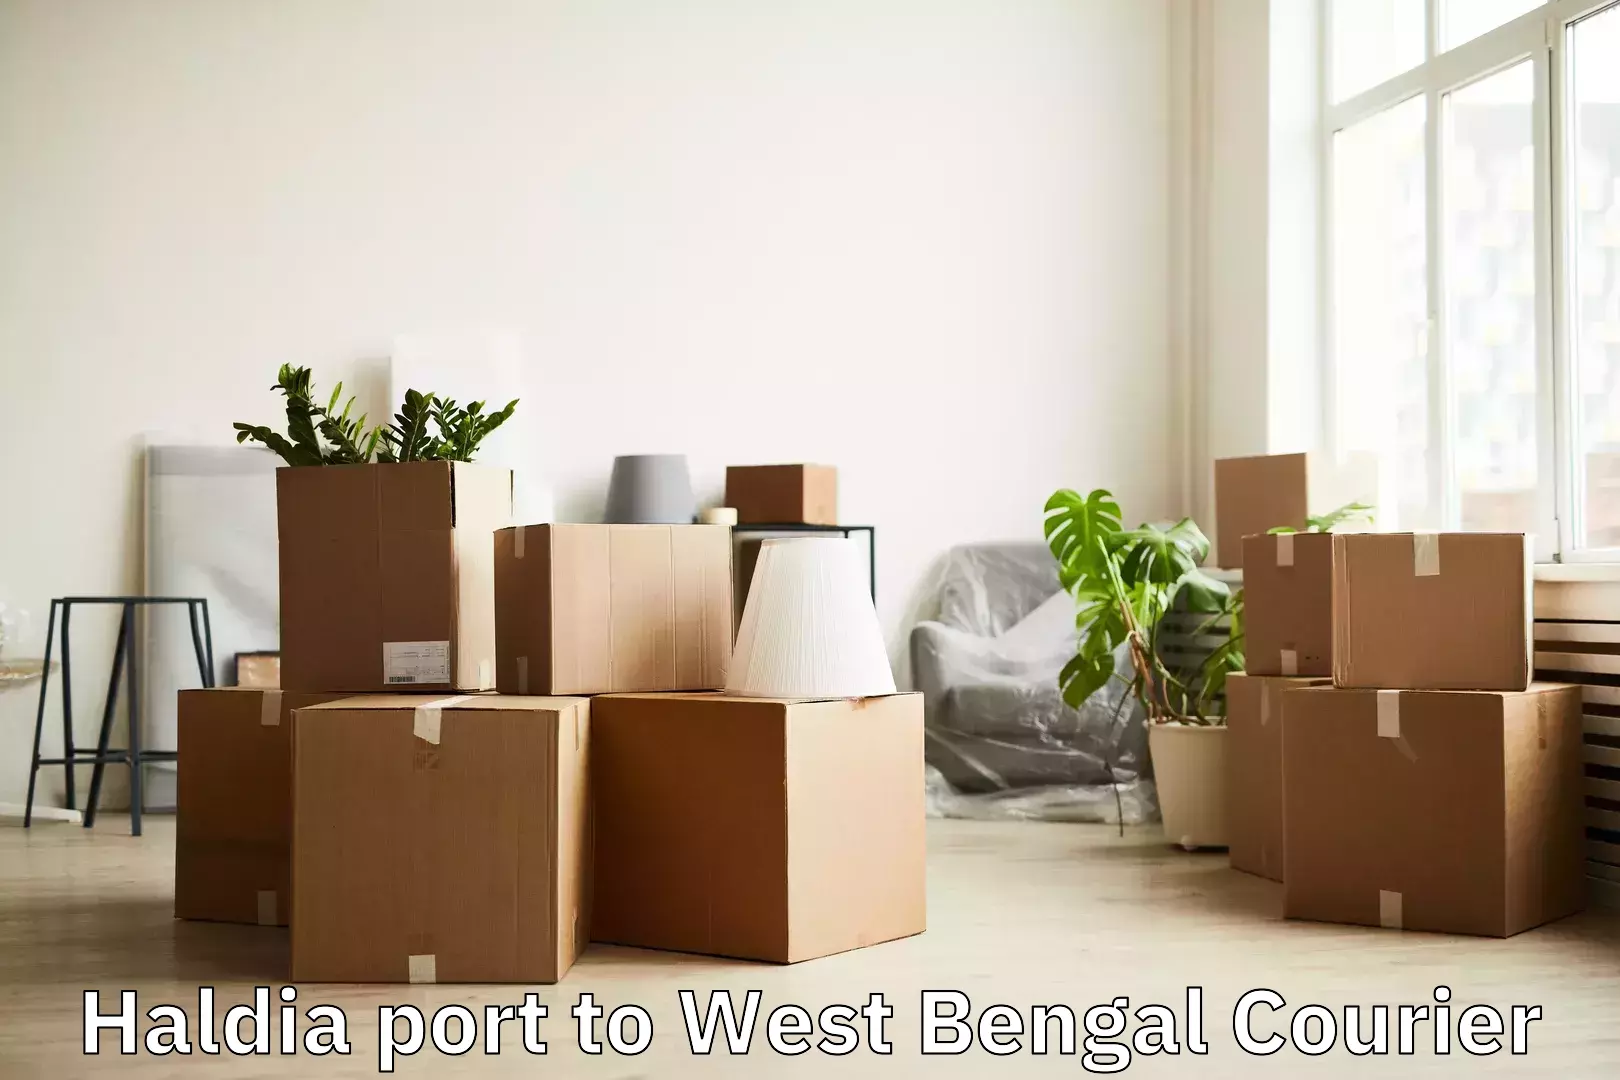 Baggage shipping experience Haldia port to West Bengal